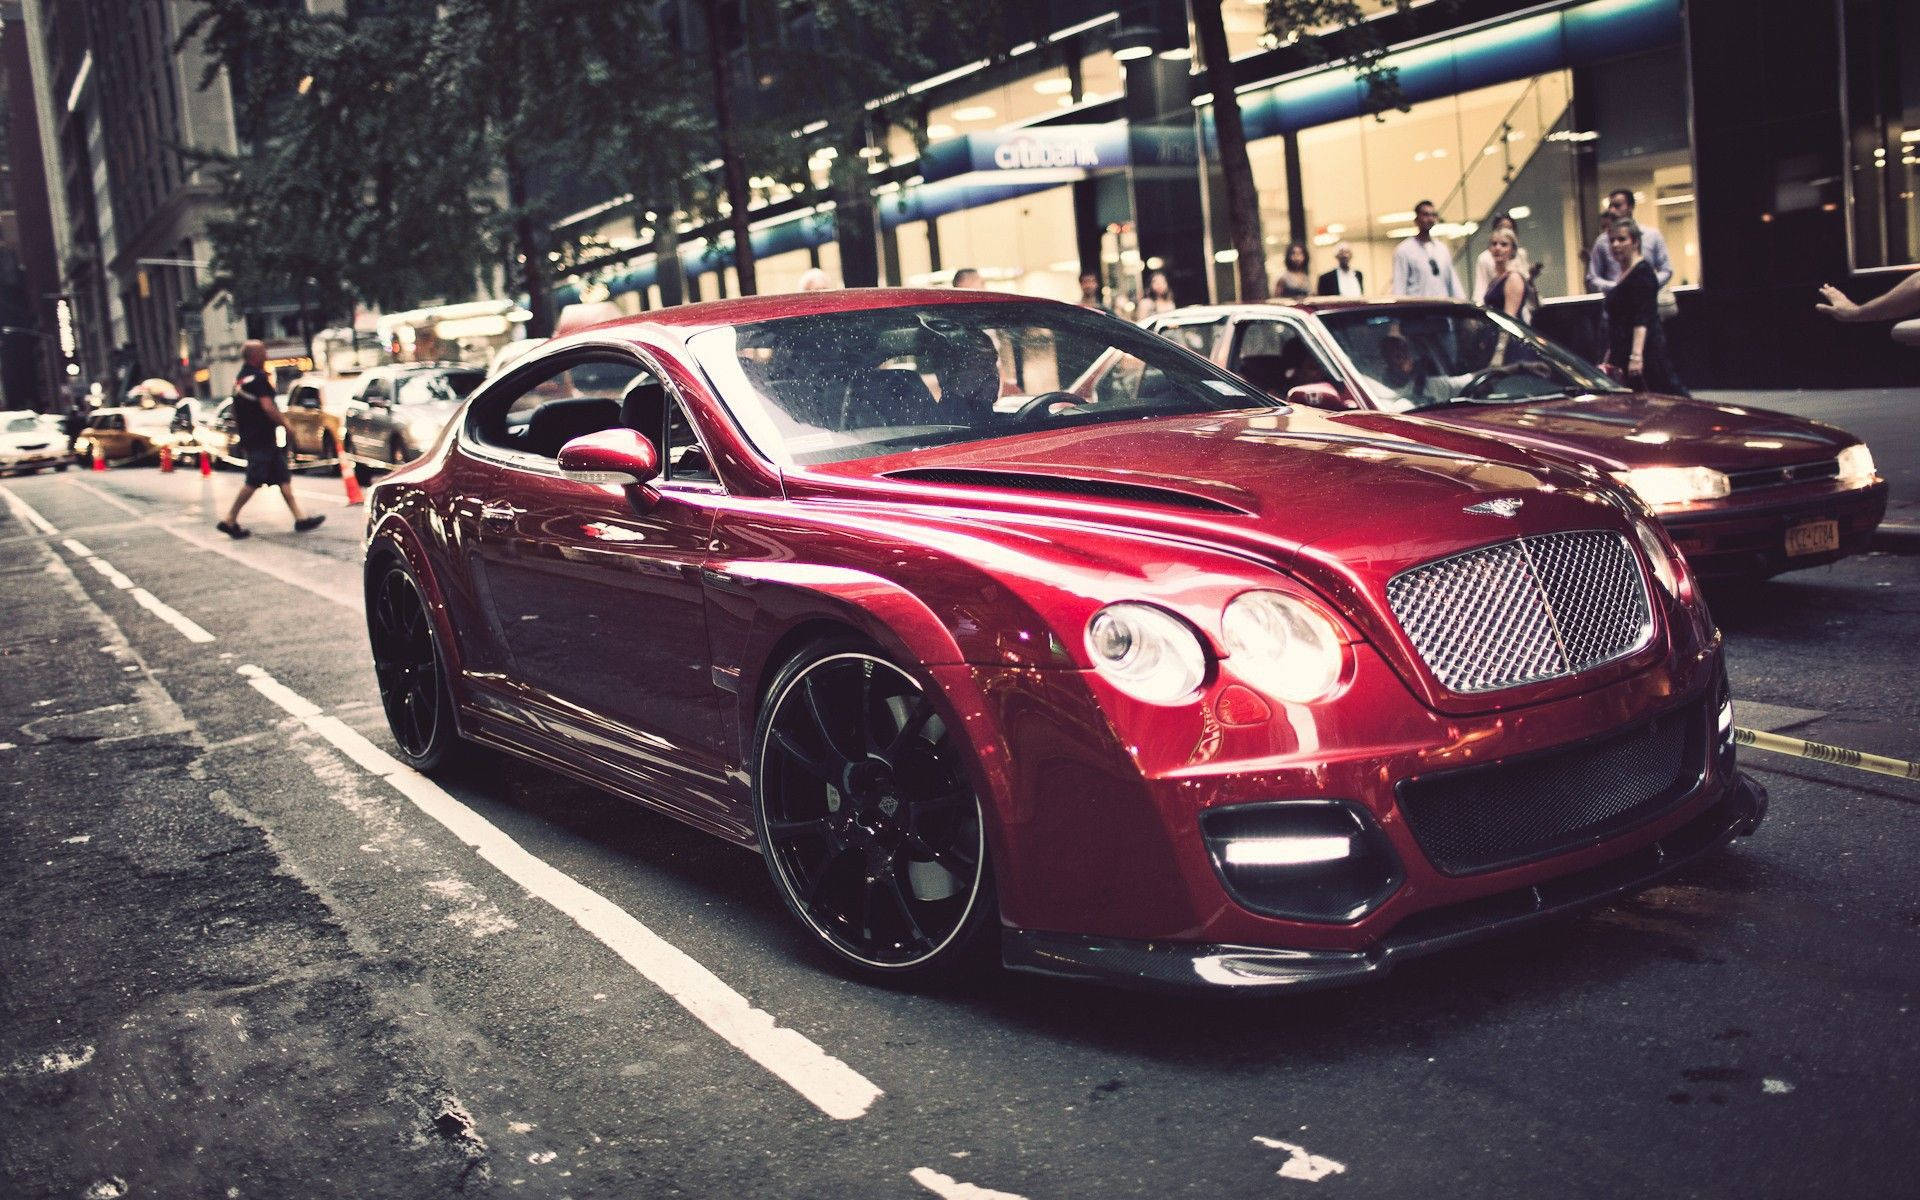 Red Bentley Street Wallpaper And Image - Wallpaper, Picture, Photos Wallpaper